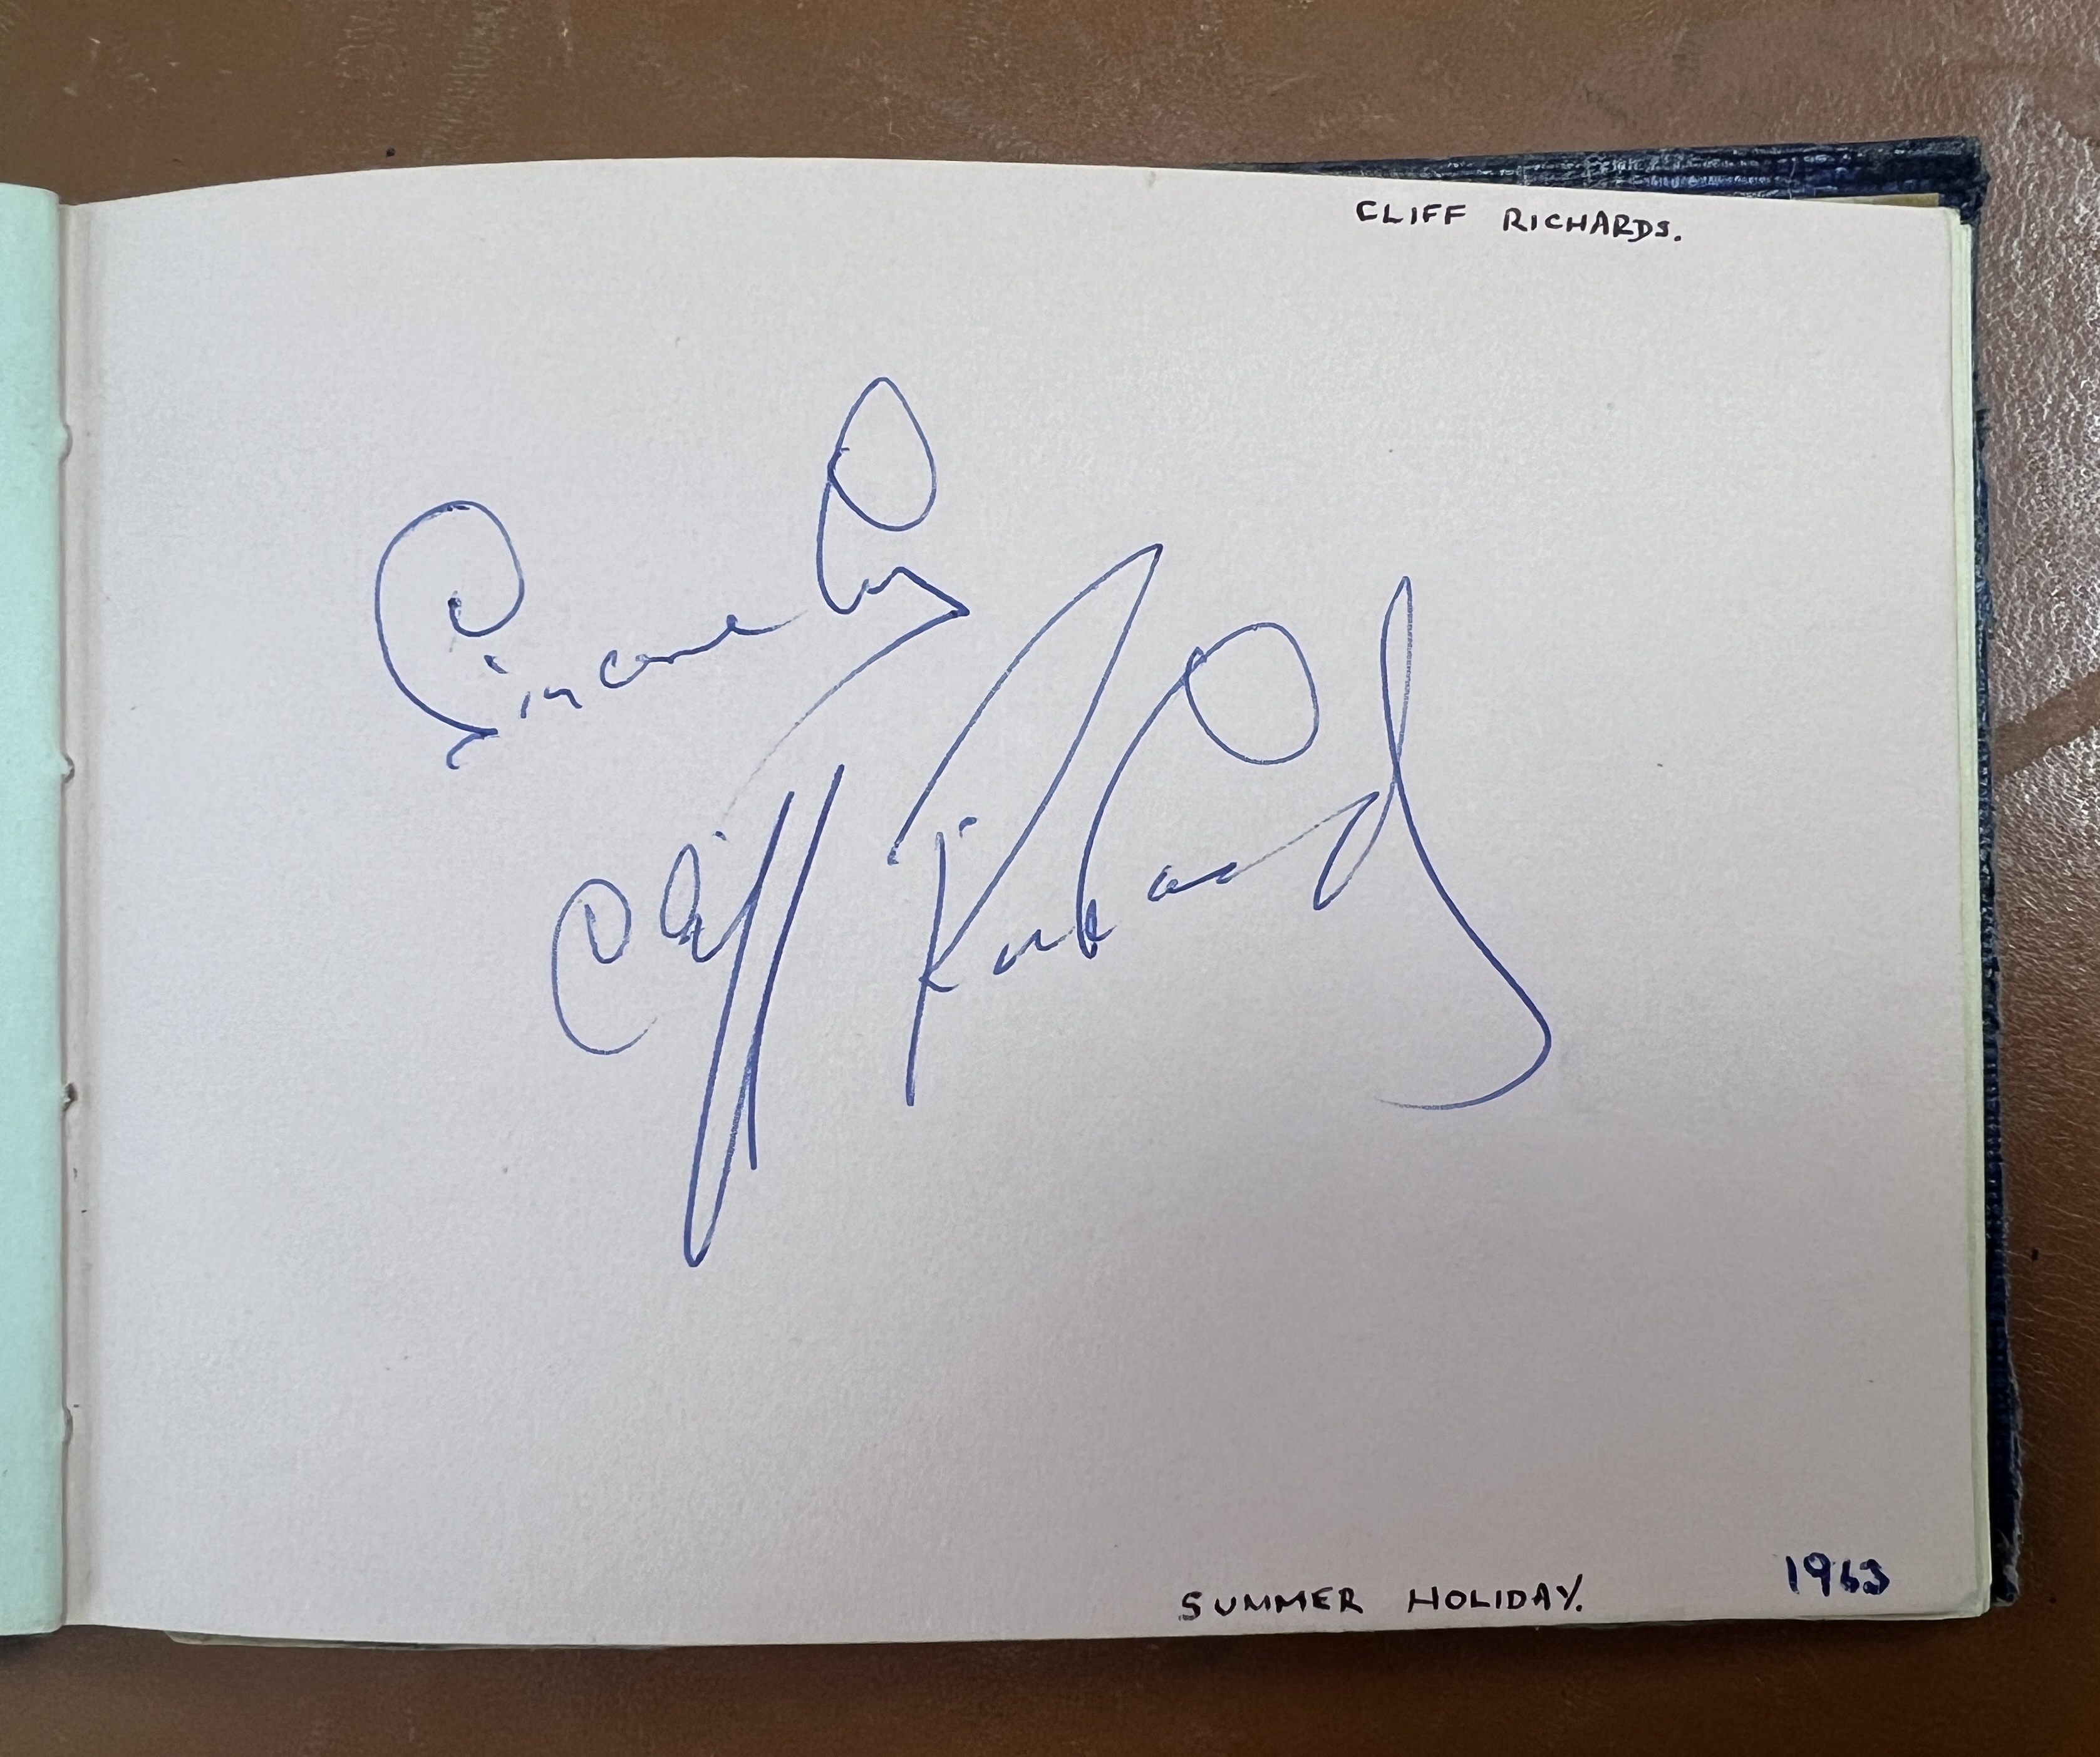 A 1960's autograph album containing autographs of various celebrities including Cliff Richard - Image 36 of 37